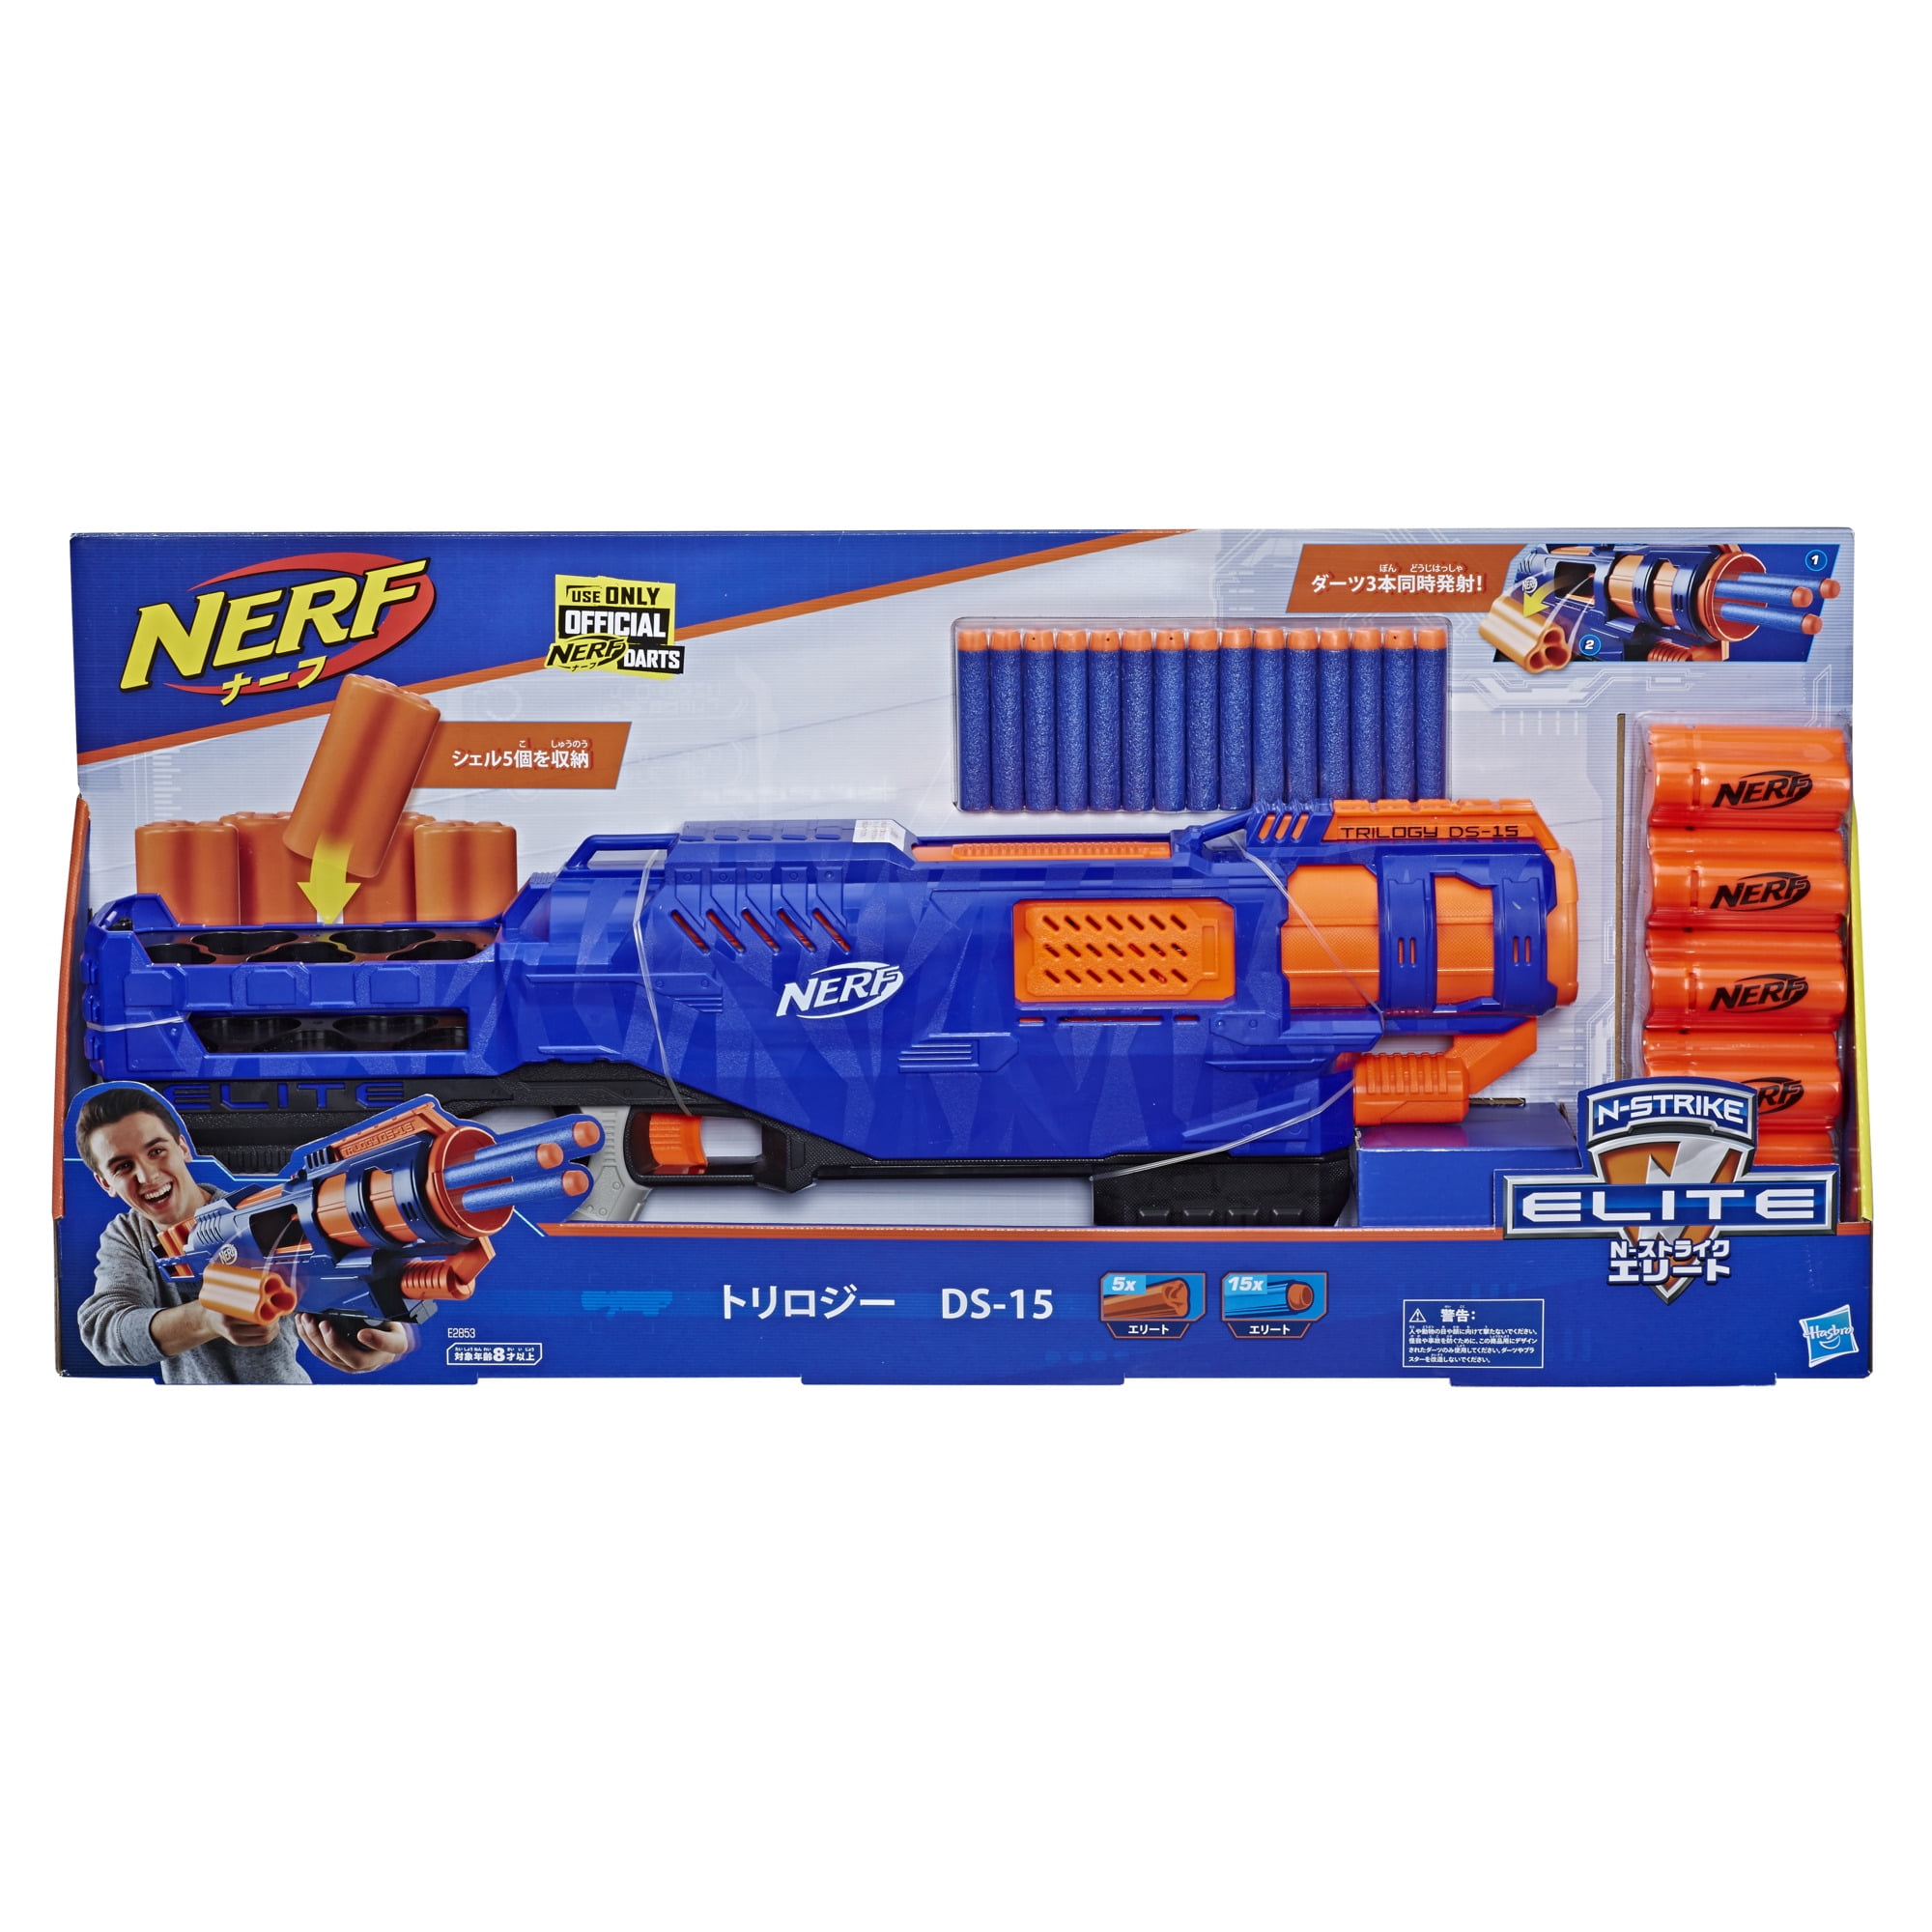 Trilogy DS-15 Nerf N-Strike Elite Toy Blaster with 15 Official Nerf Elite  Darts and 5 Shells – For Kids, Teens, Adults